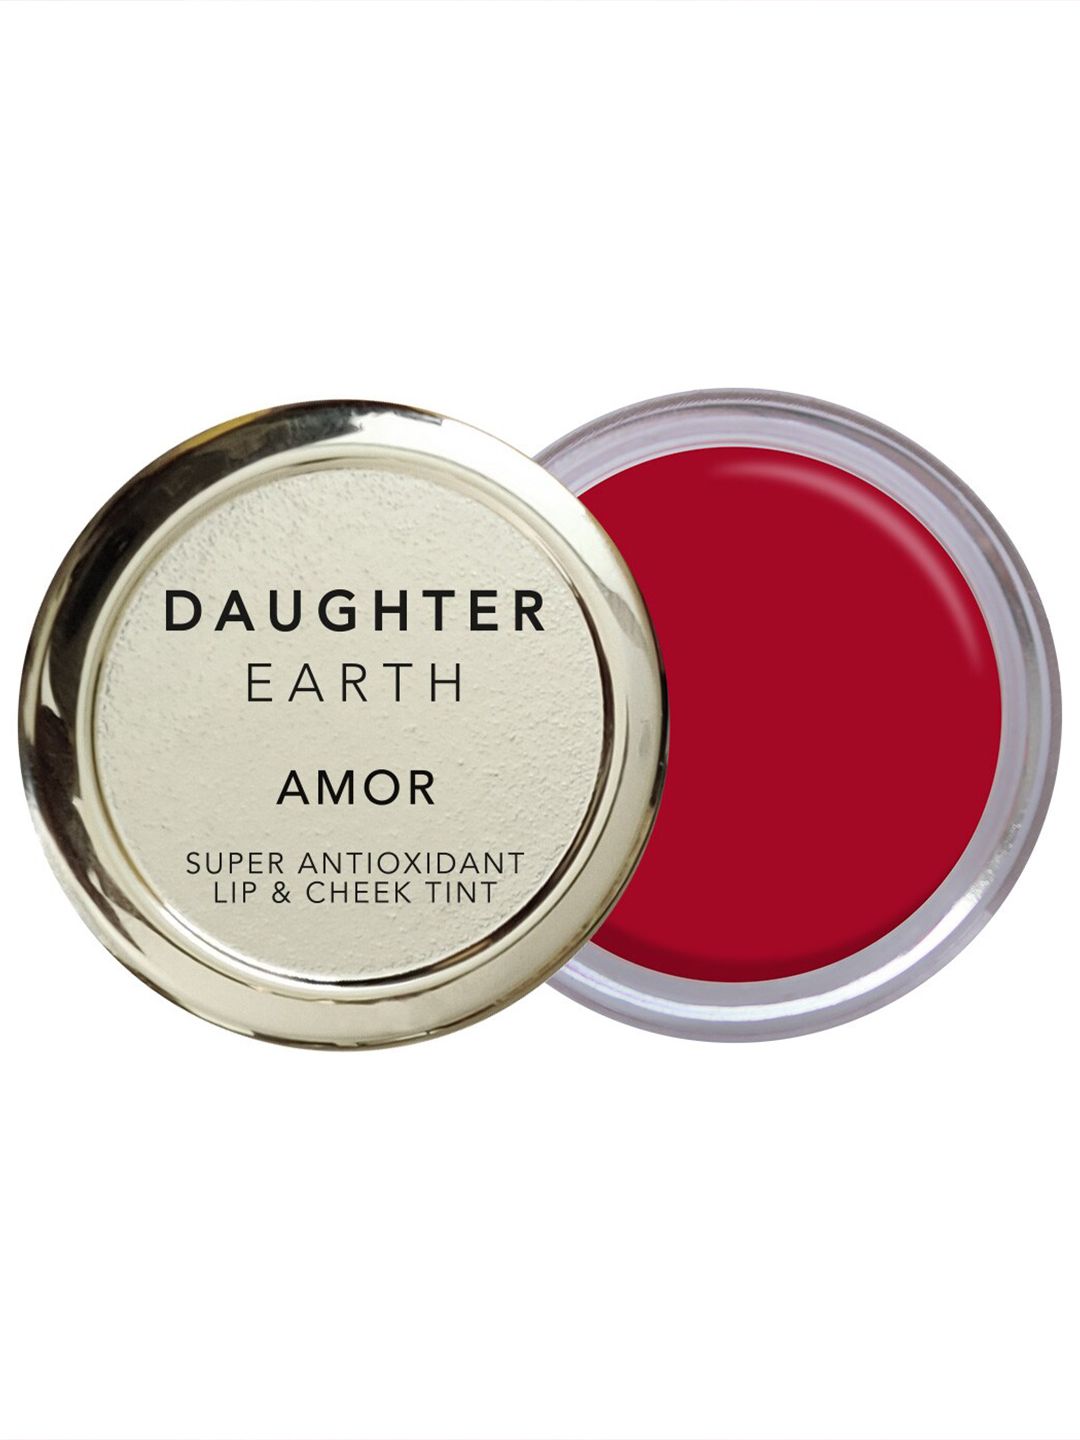 DAUGHTER EARTH Super Antioxidant Lip & Cheek Tint -Amor The True Red Price in India